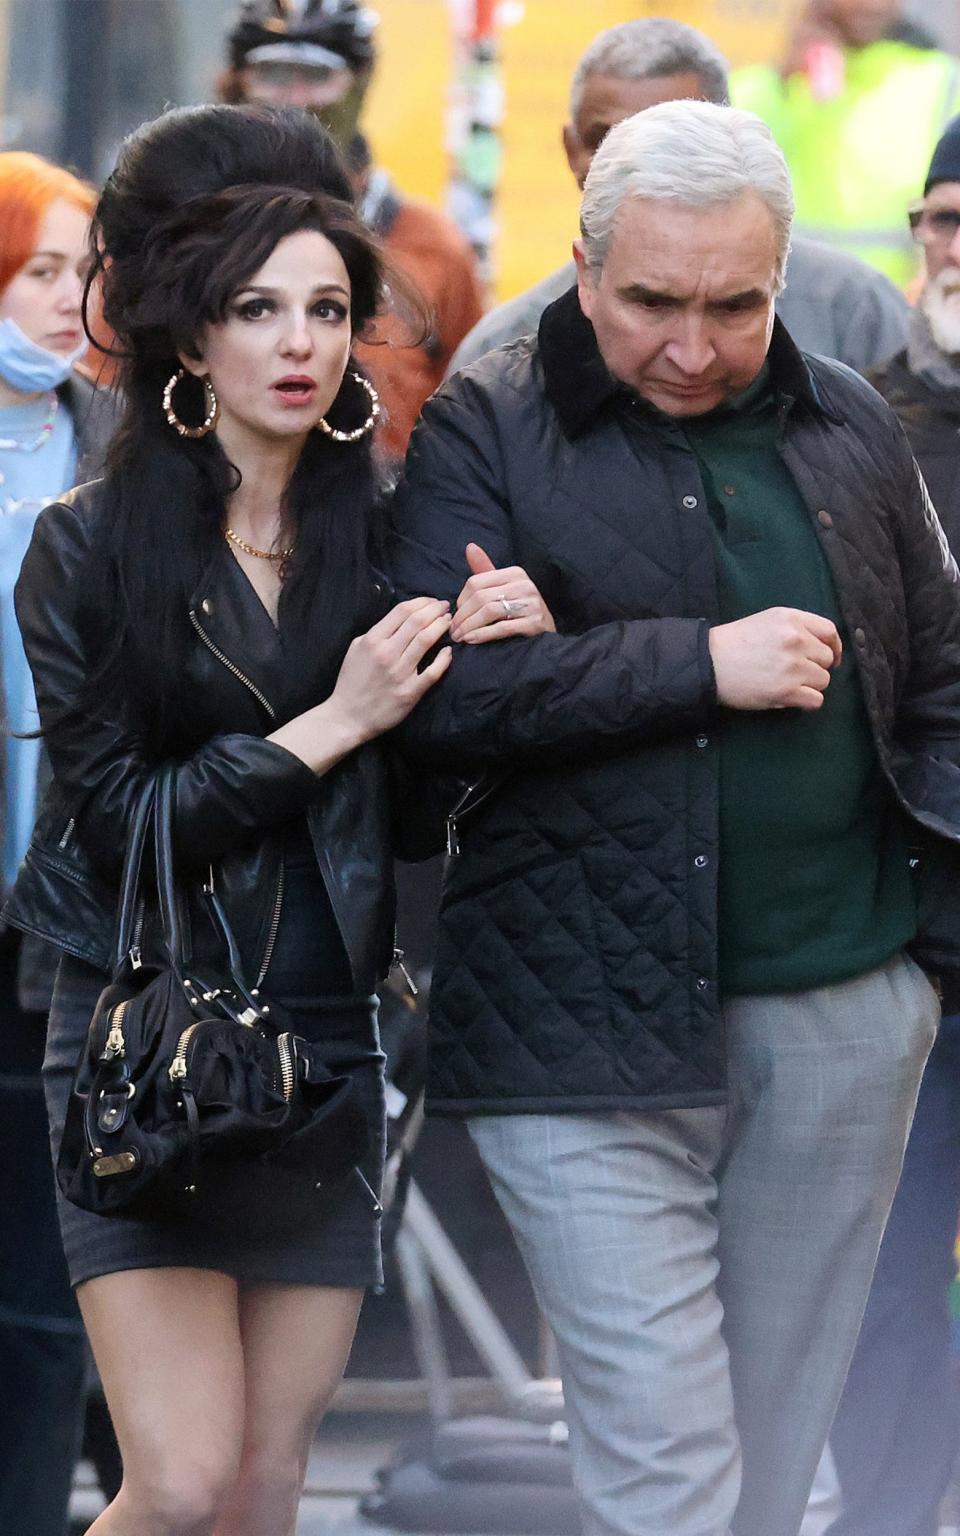 Marisa Abela and Eddie Marsan in Soho, London, during the filming of the Amy Winehouse-inspired movie 'Back to Black'